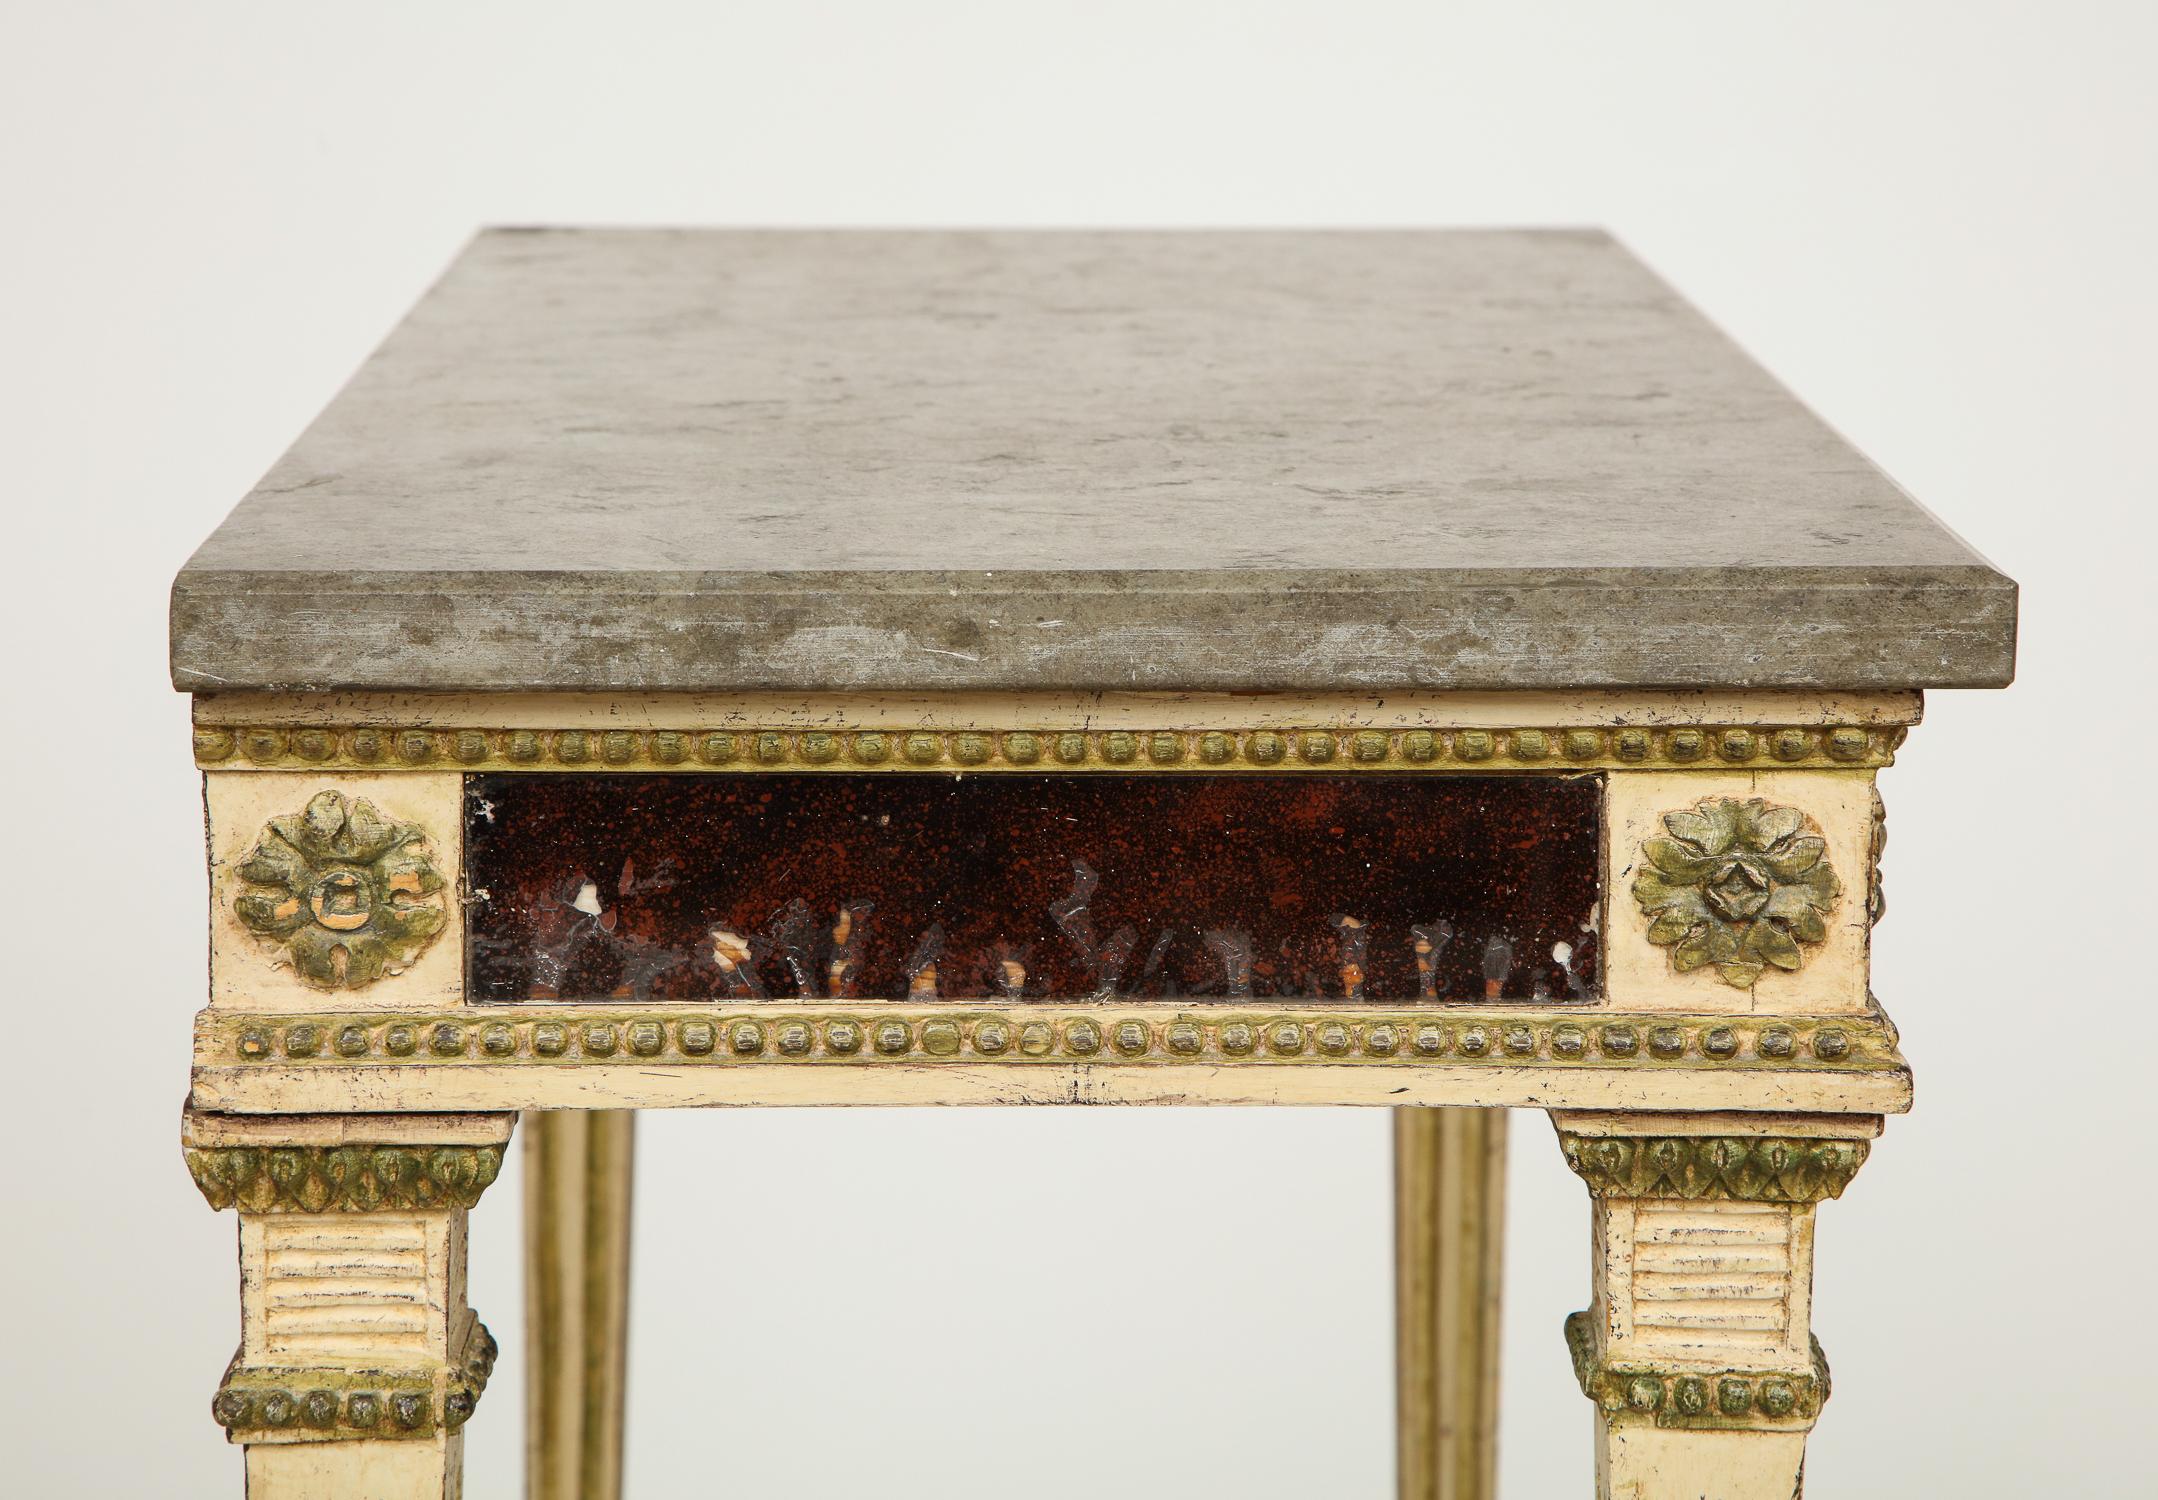 Hand-Carved Gustavian Neoclassical Console with Stone Top, Origin: Sweden, Circa 1780